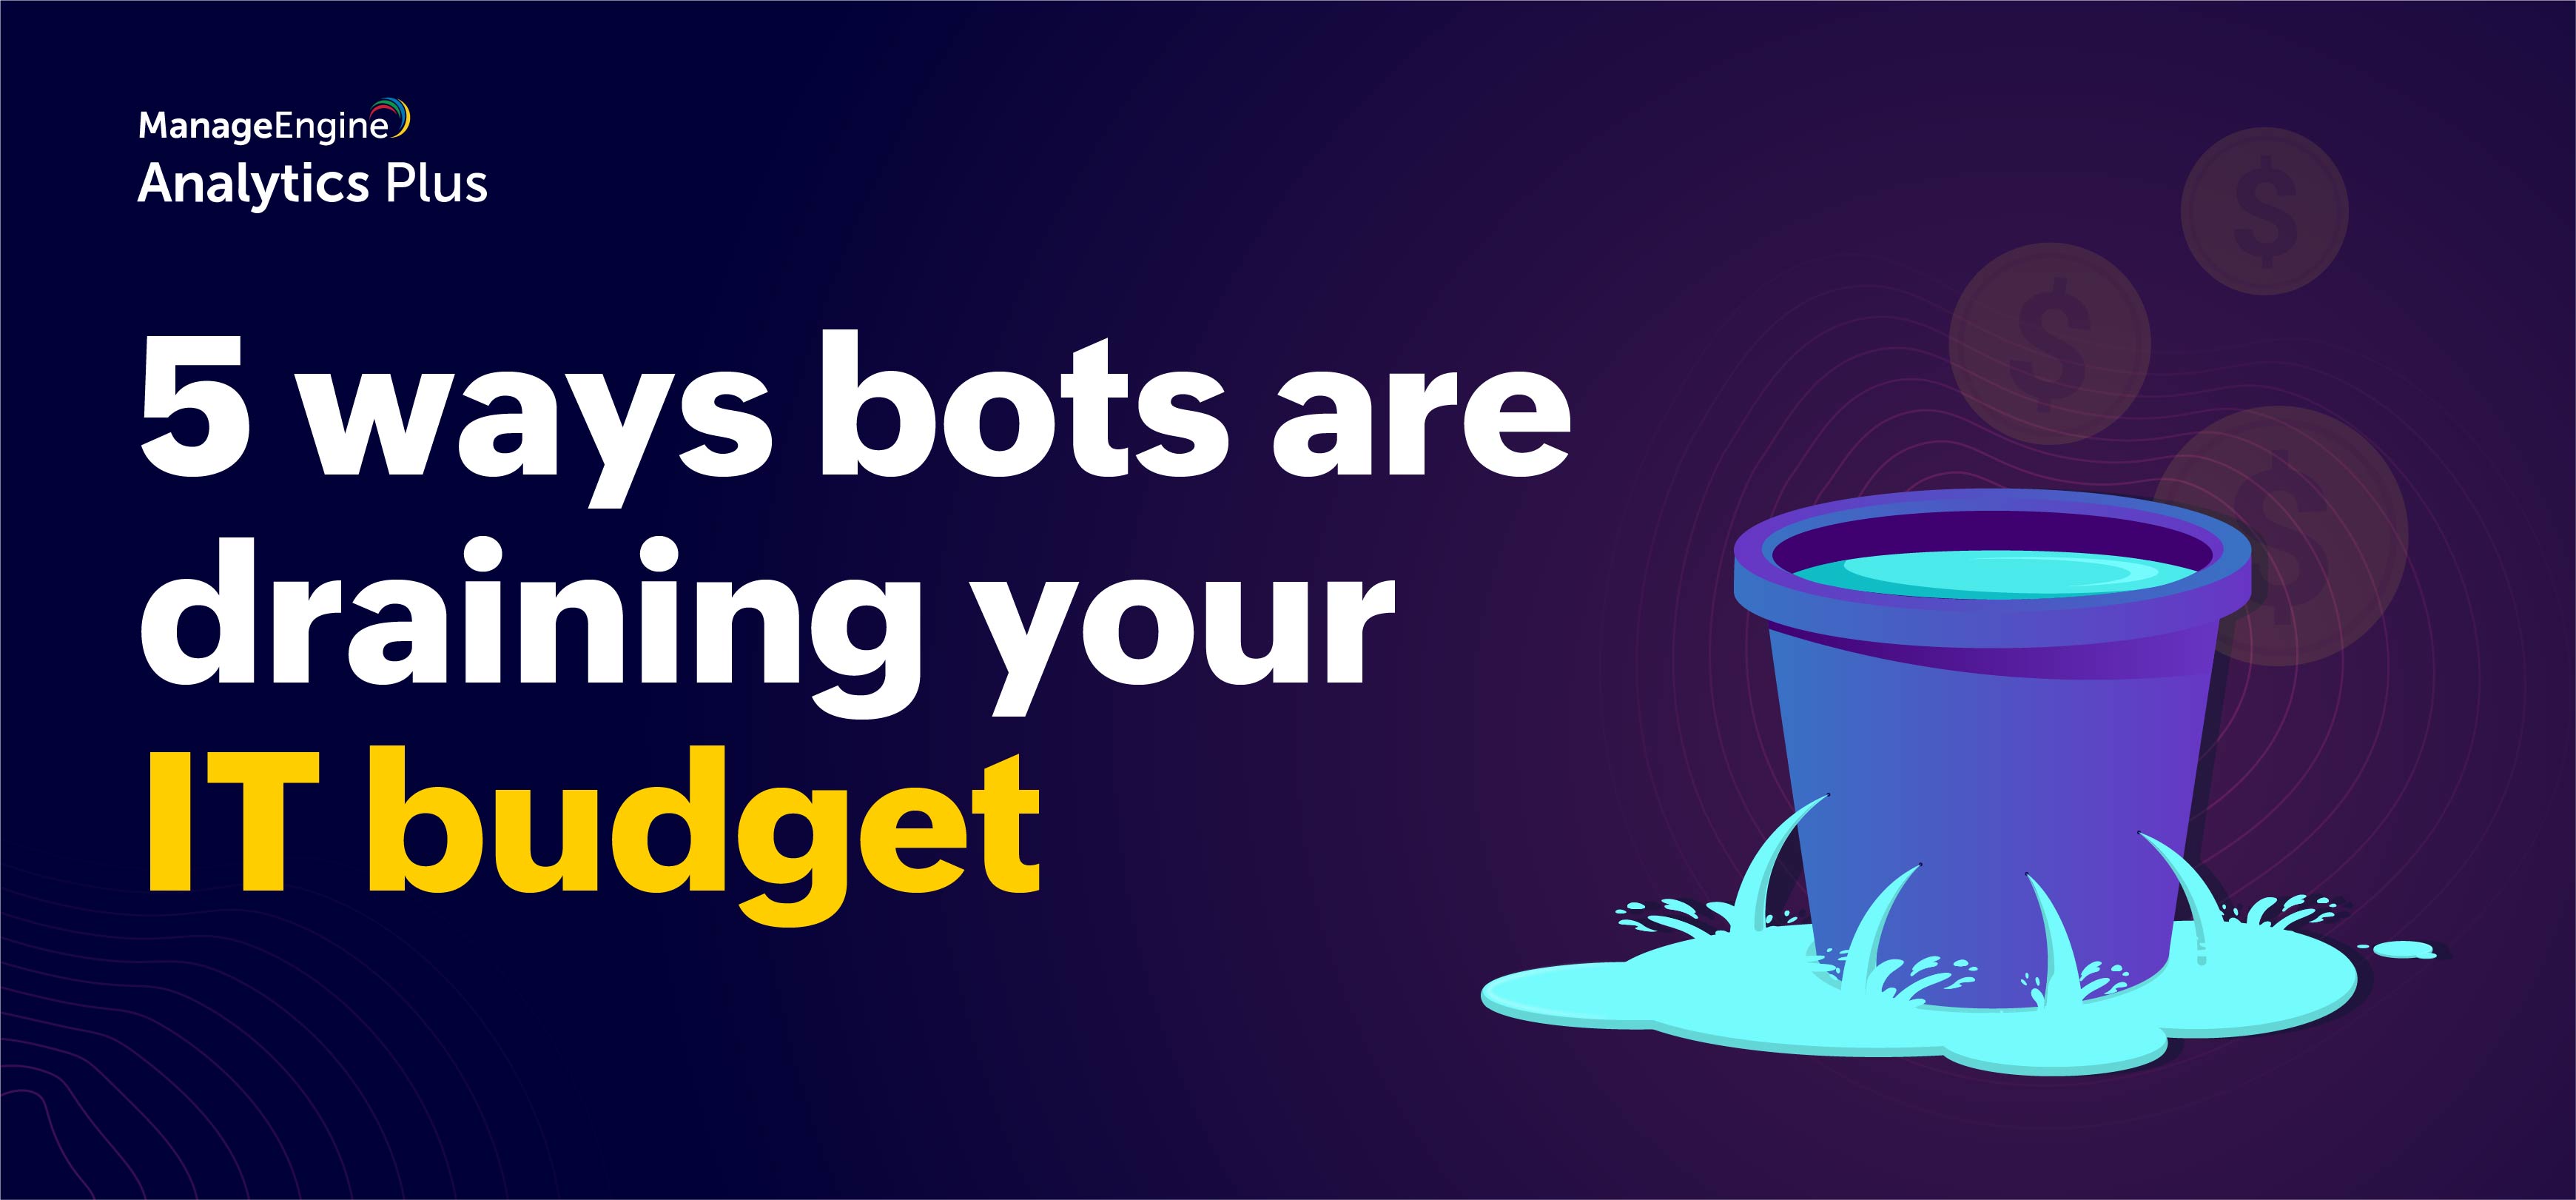 5 ways bots are draining your IT budget 